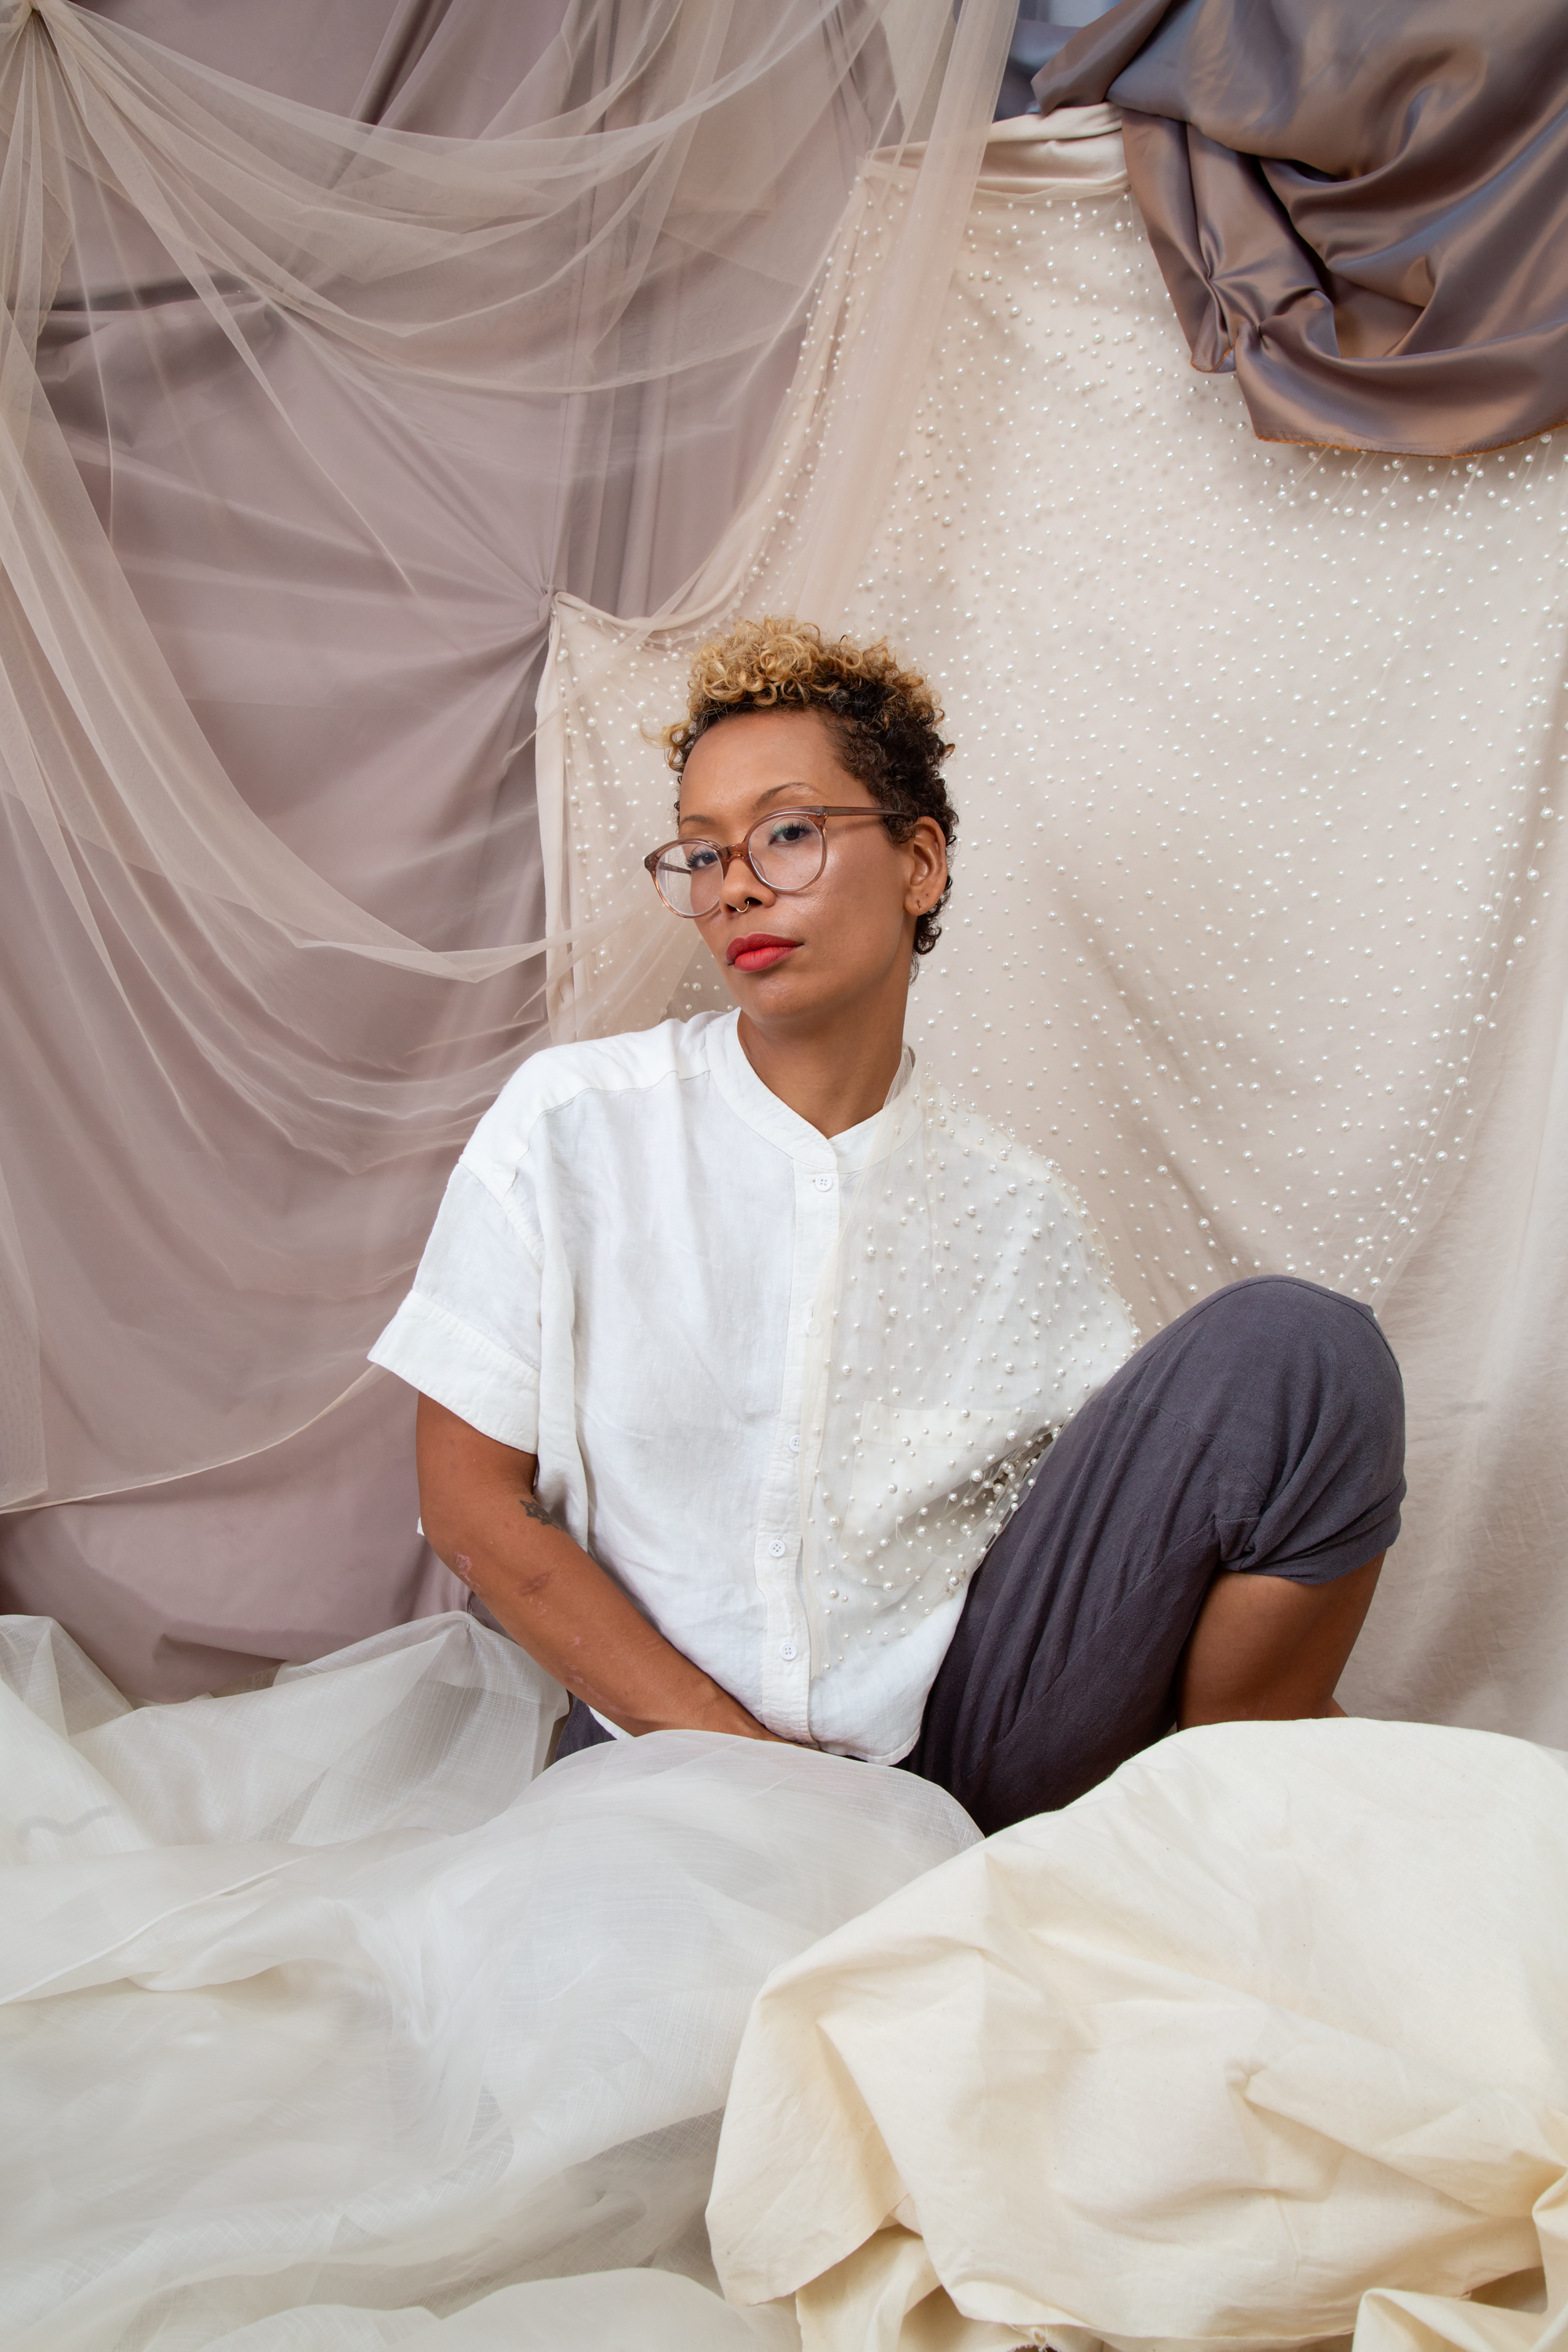 Naima Green, Jenna, from “Pur·suit,” 2018–present. Courtesy of the artist.